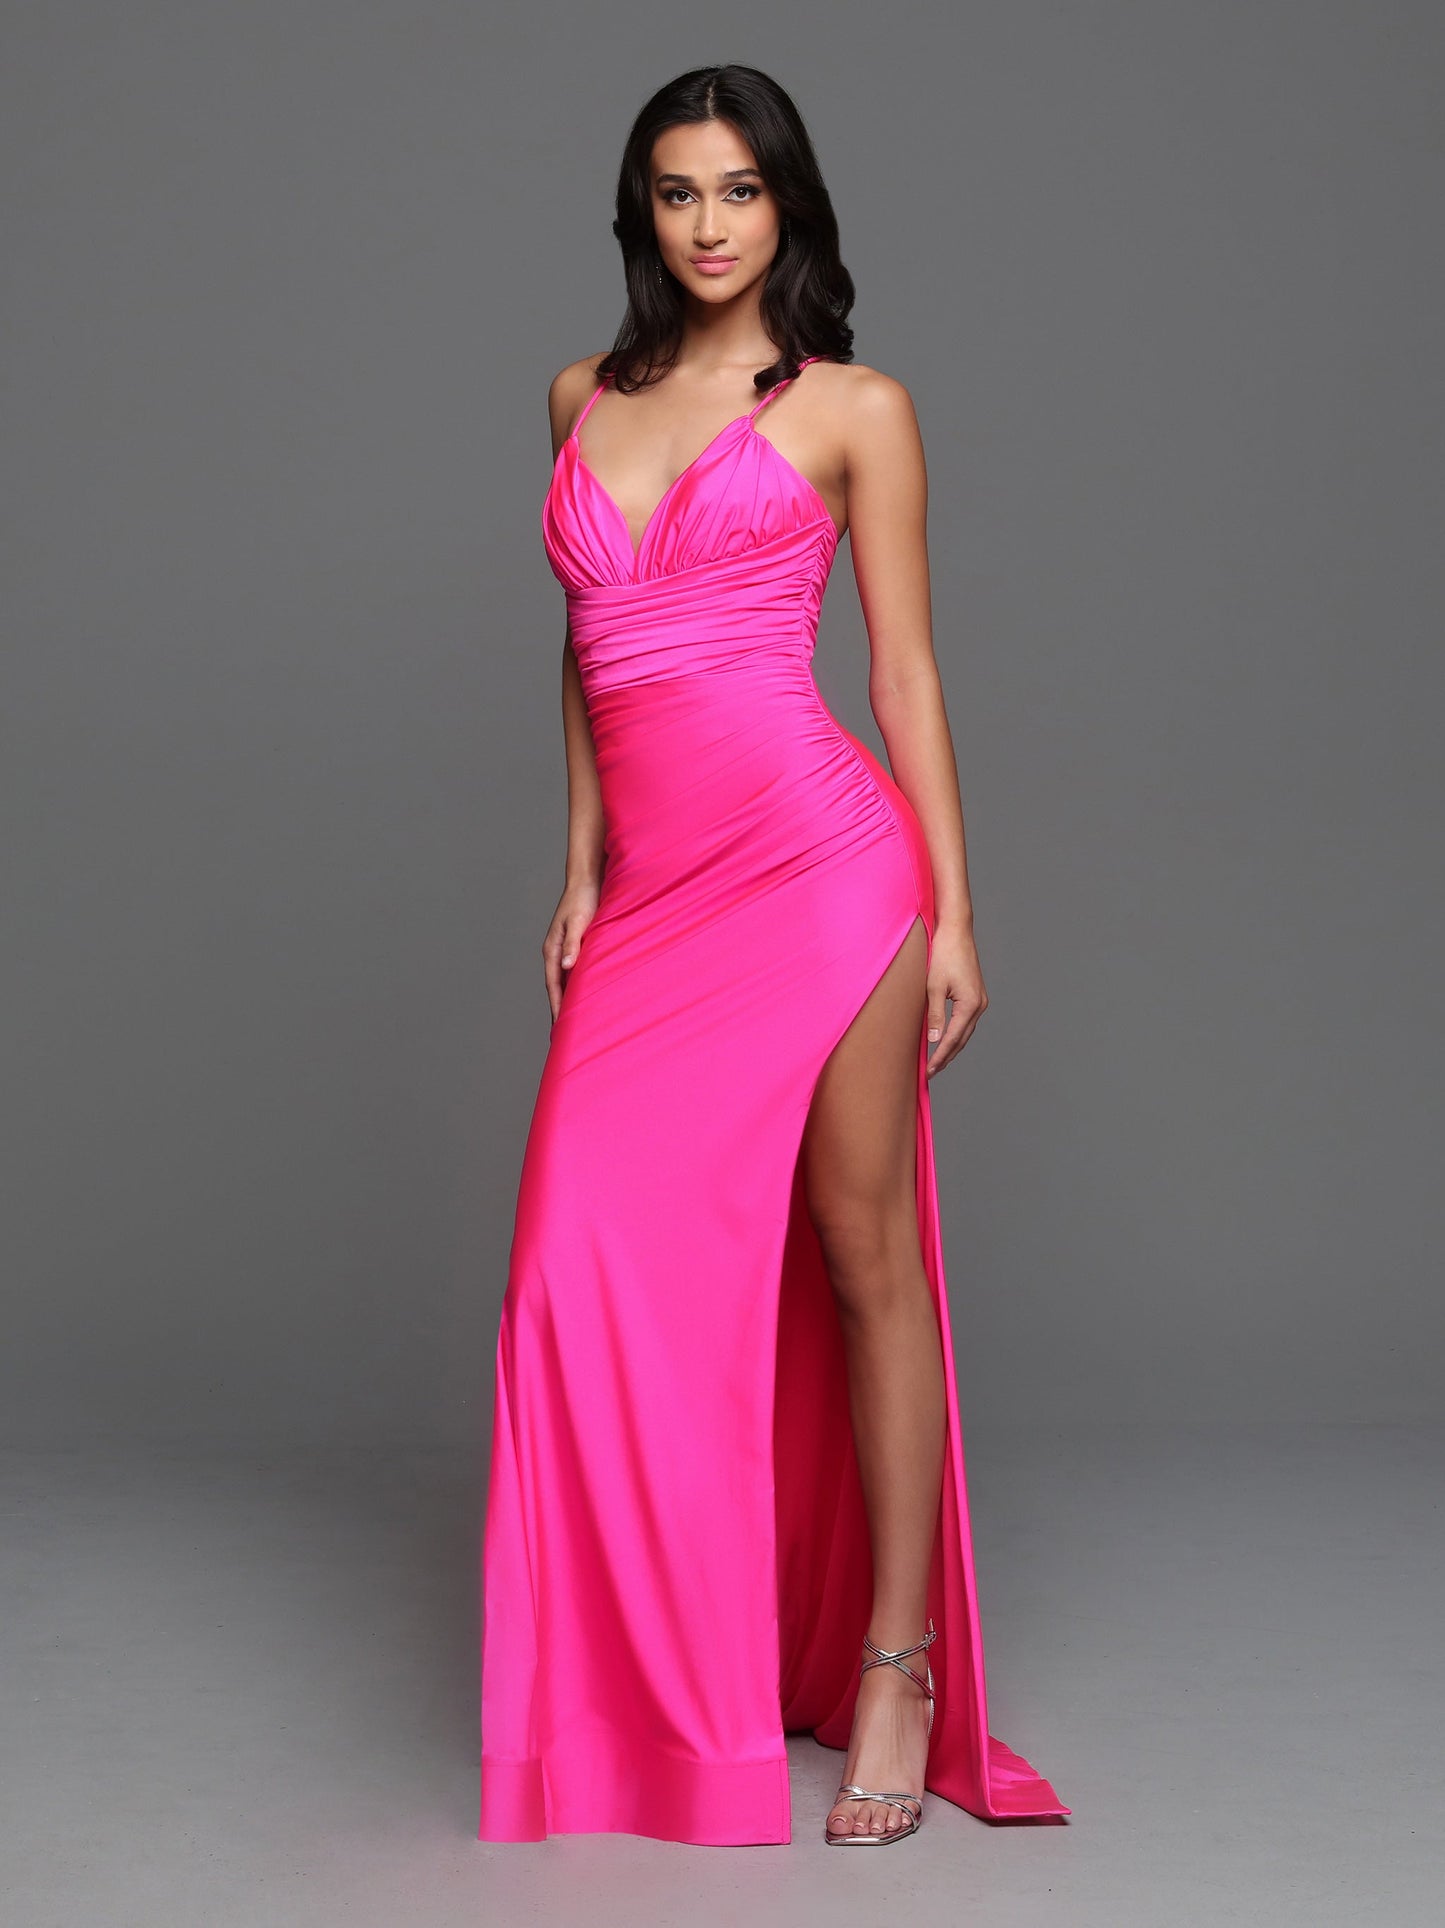 Sparkle Prom 72254 Long Fitted Jersey Neon Prom Dress Corset Side Slit Formal Gown  Sizes: 0-20  Colors: Neon Orange, Neon Pink, Purple